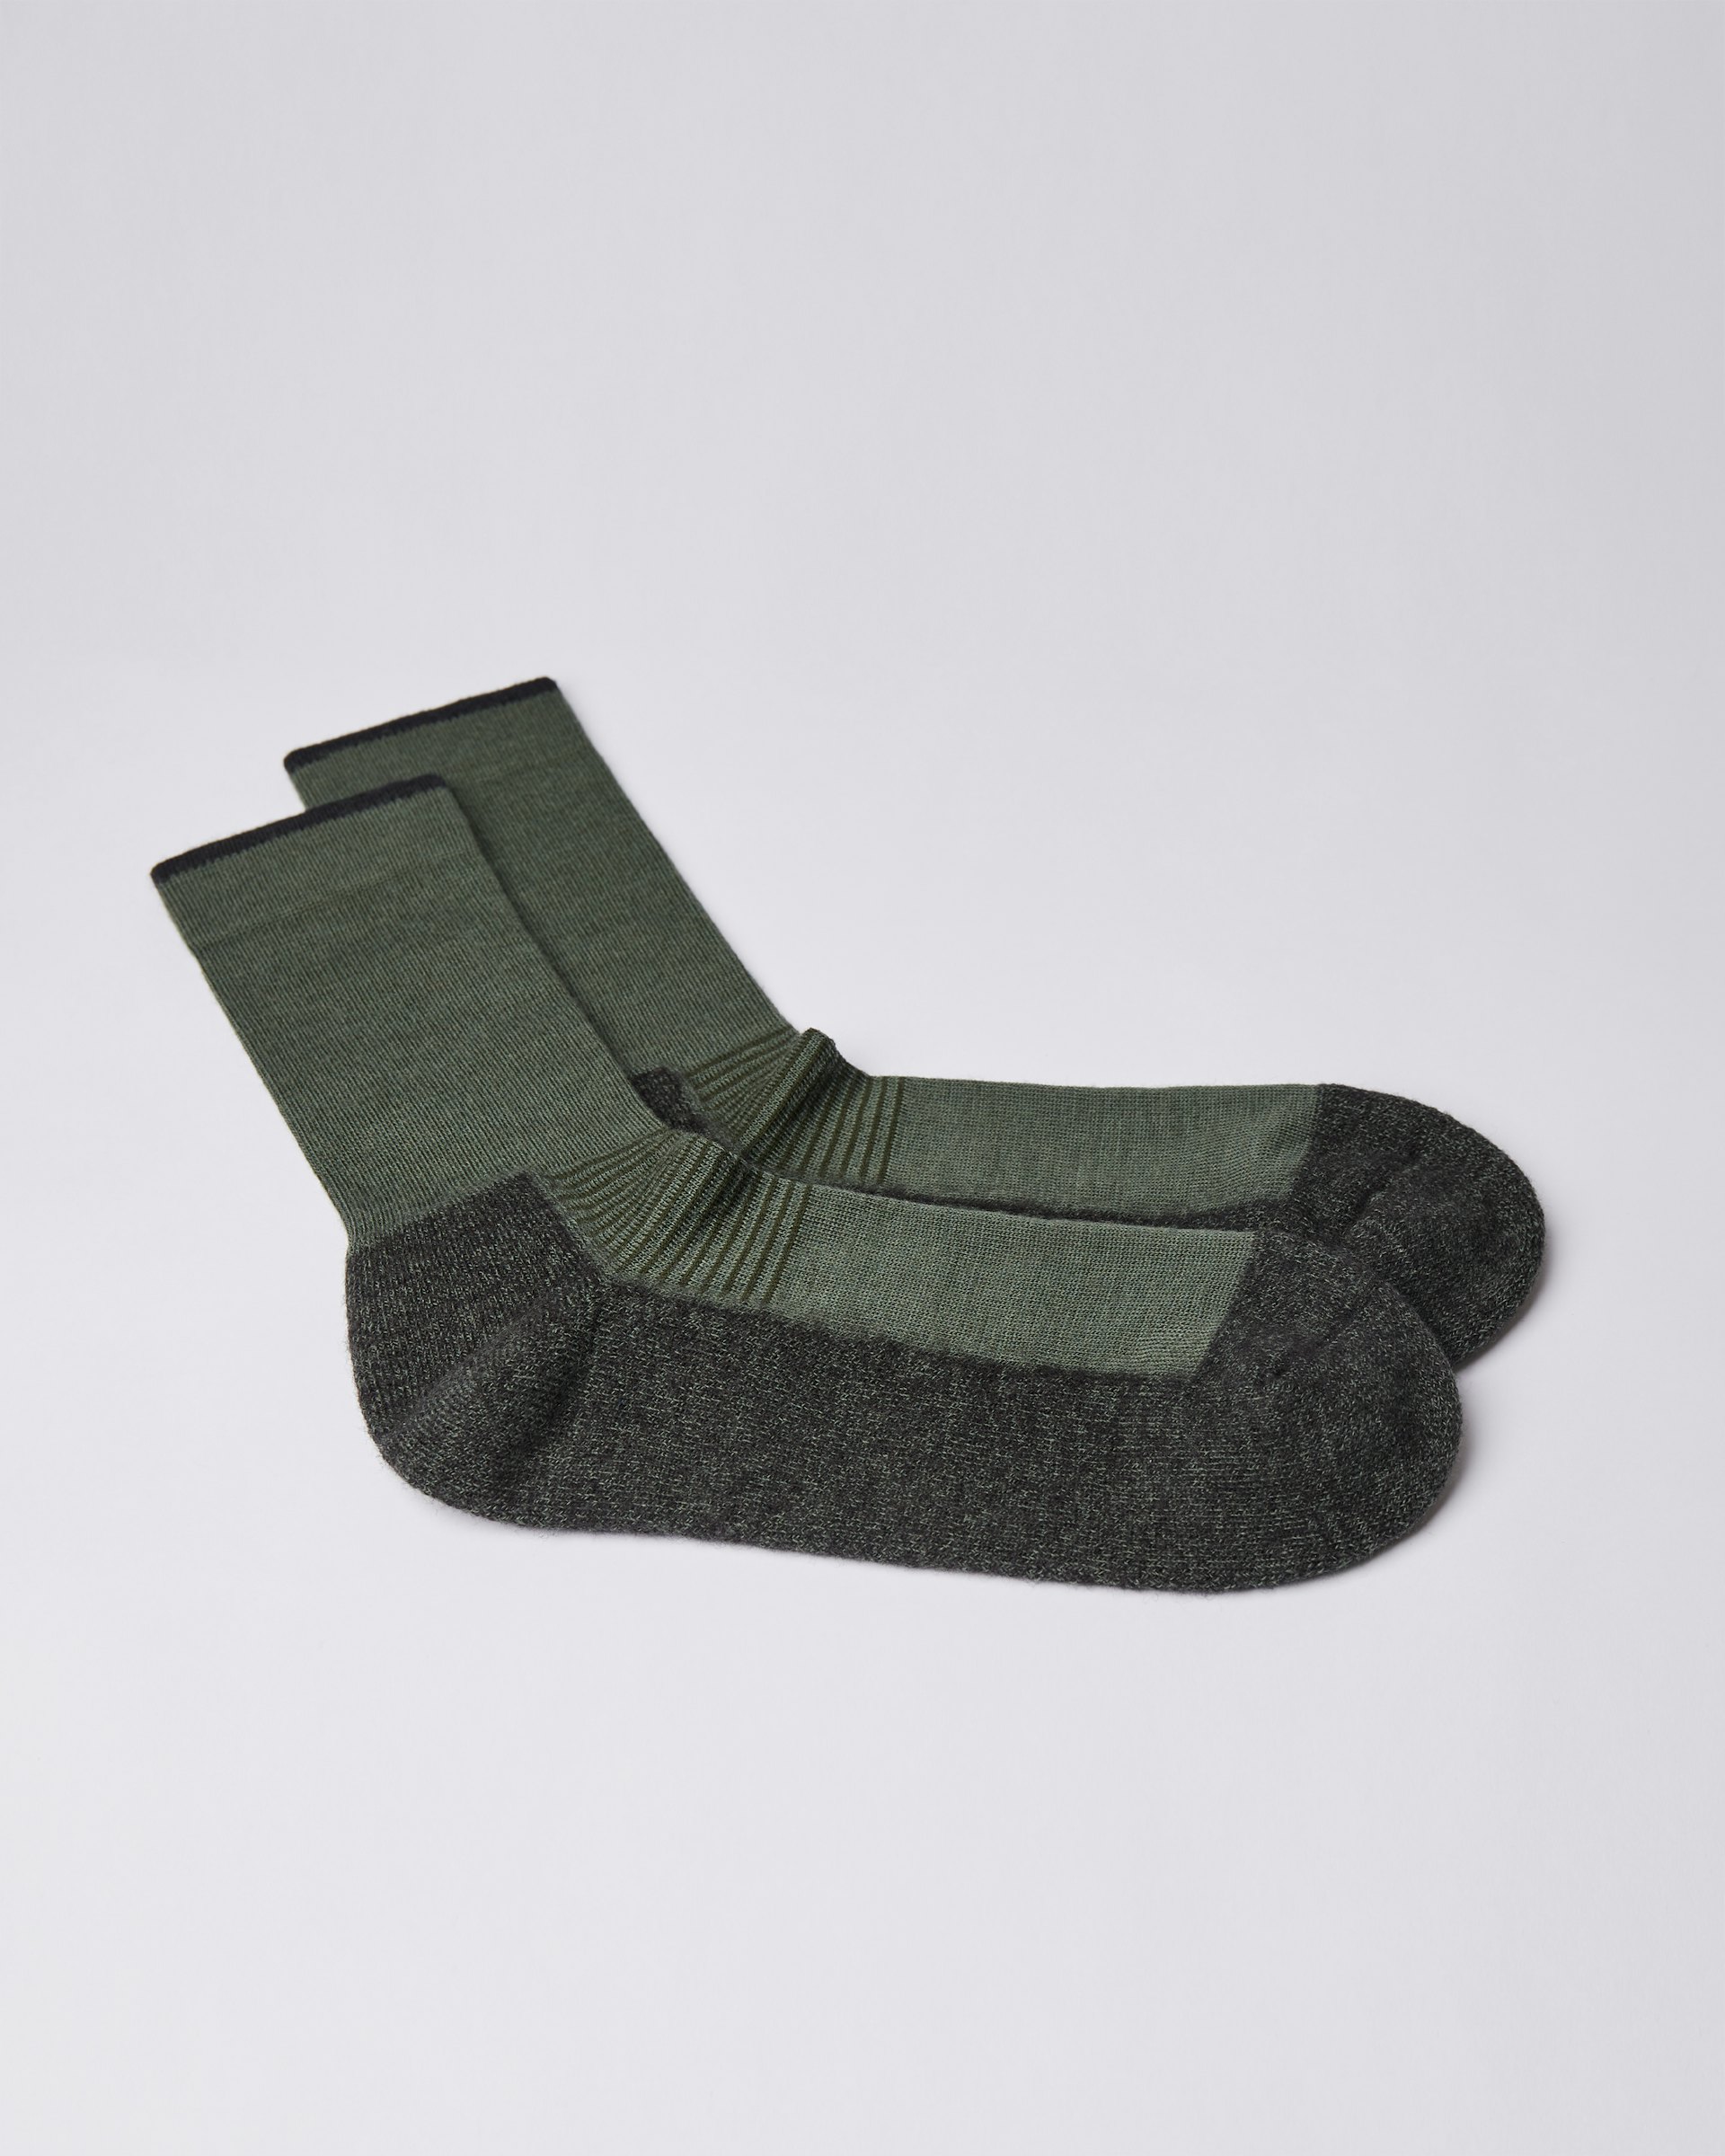 Wool Sock belongs to the category Items and is in color green & green (3 of 3)